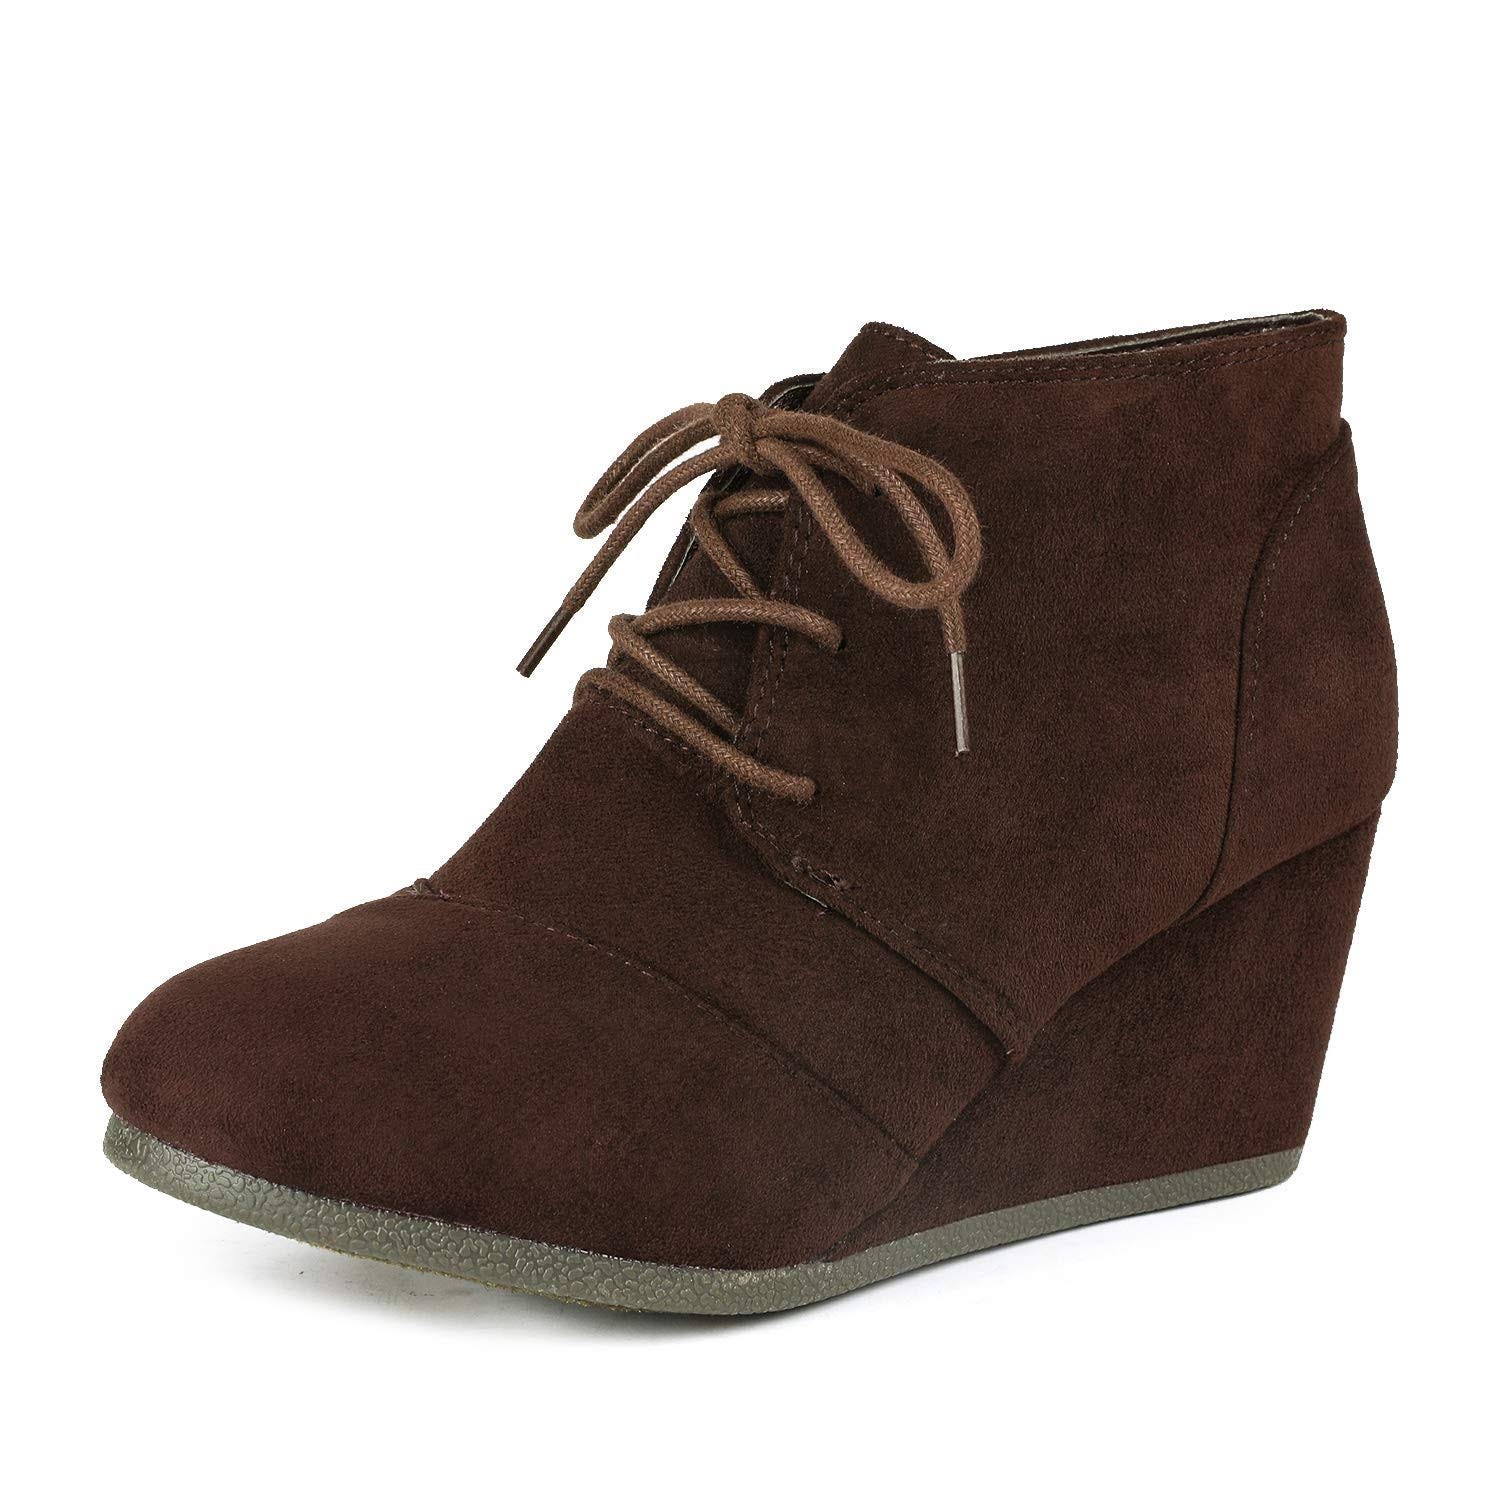 Comfortable Lace-Up Low Wedge Heel Booties for Women | Image